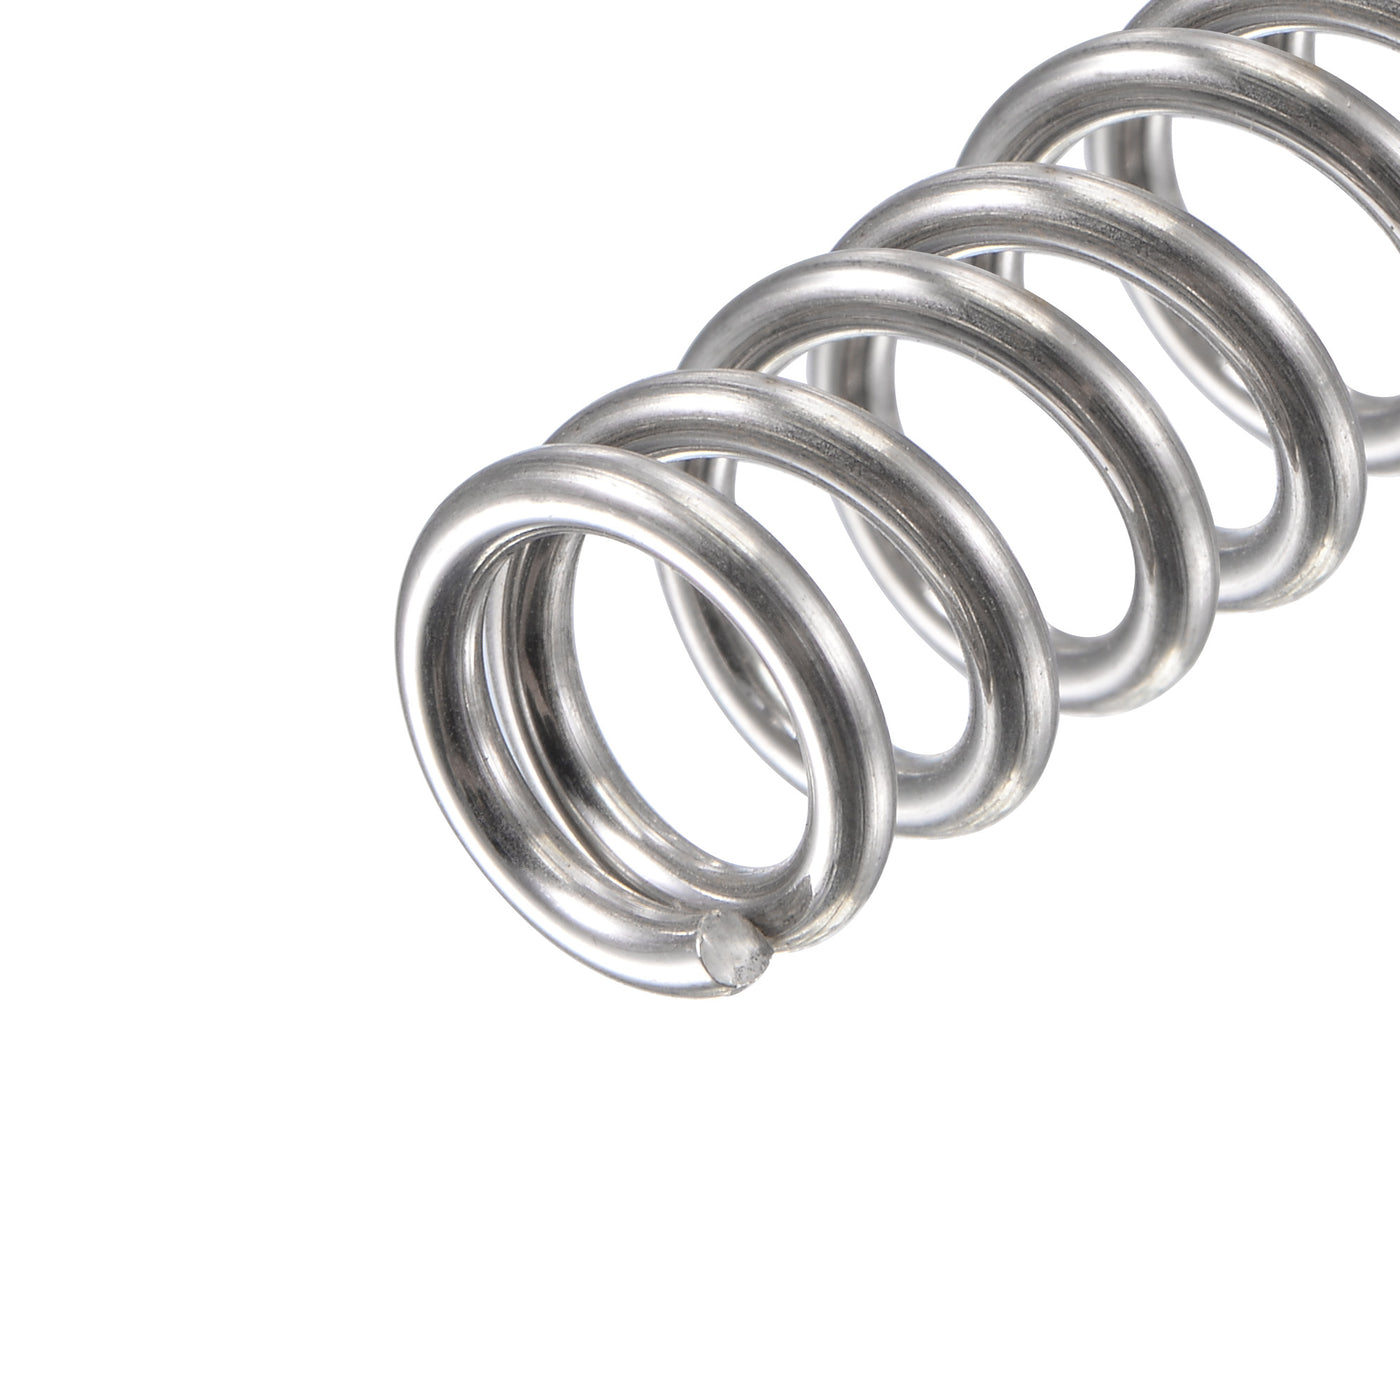 uxcell Uxcell 8mmx1.2mmx25mm 304 Stainless Steel Compression Spring 61.8N Load Capacity 15pcs